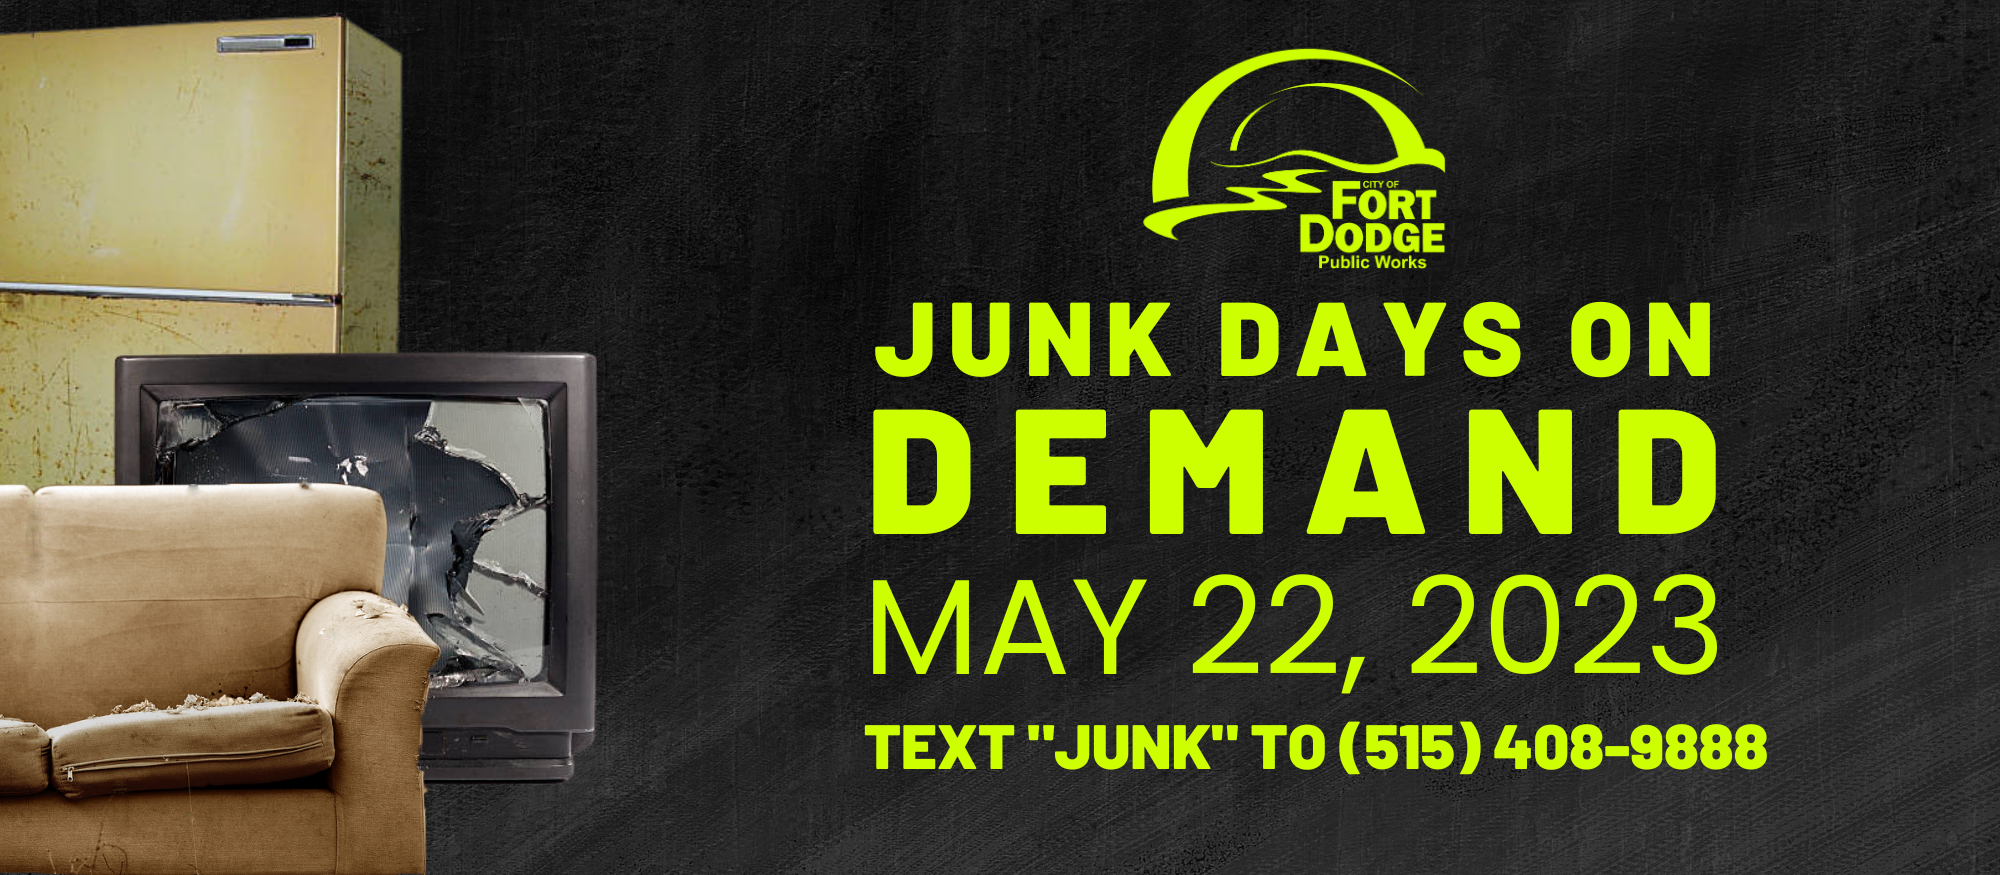 Junk Days on Demand Back May 22, 2023